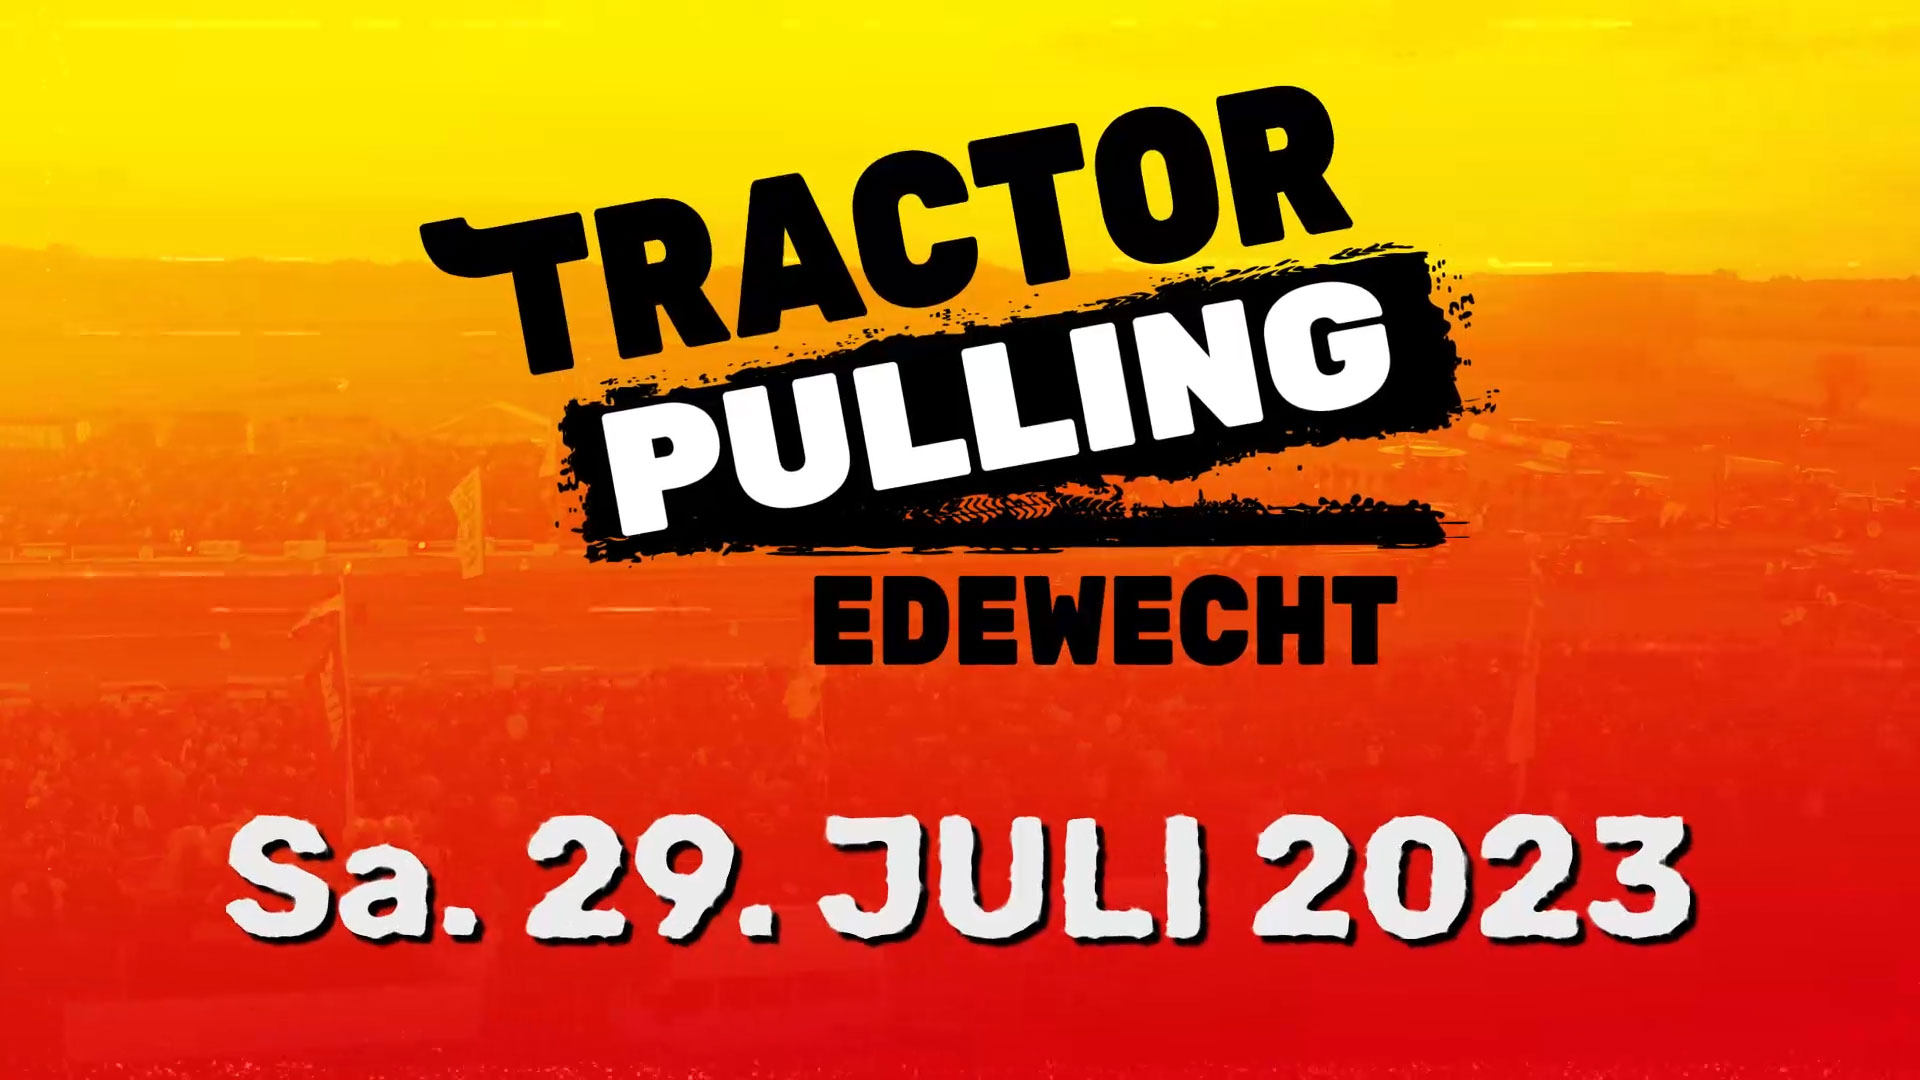 Tractor Pulling Edewecht — Full Pull is not enough!